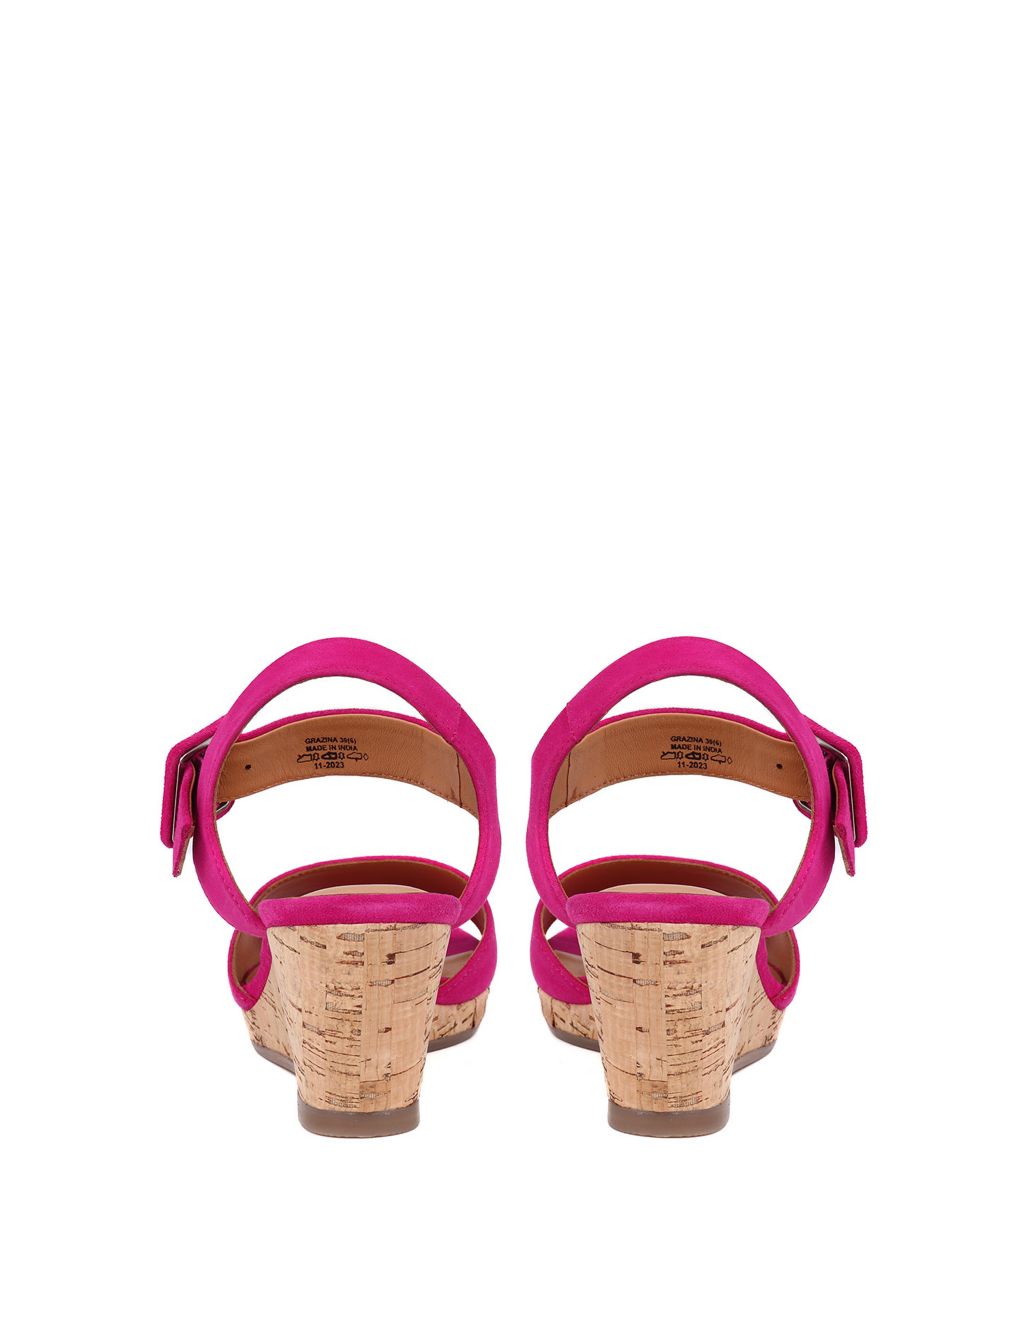 Suede Ankle Strap Wedge Sandals image 5